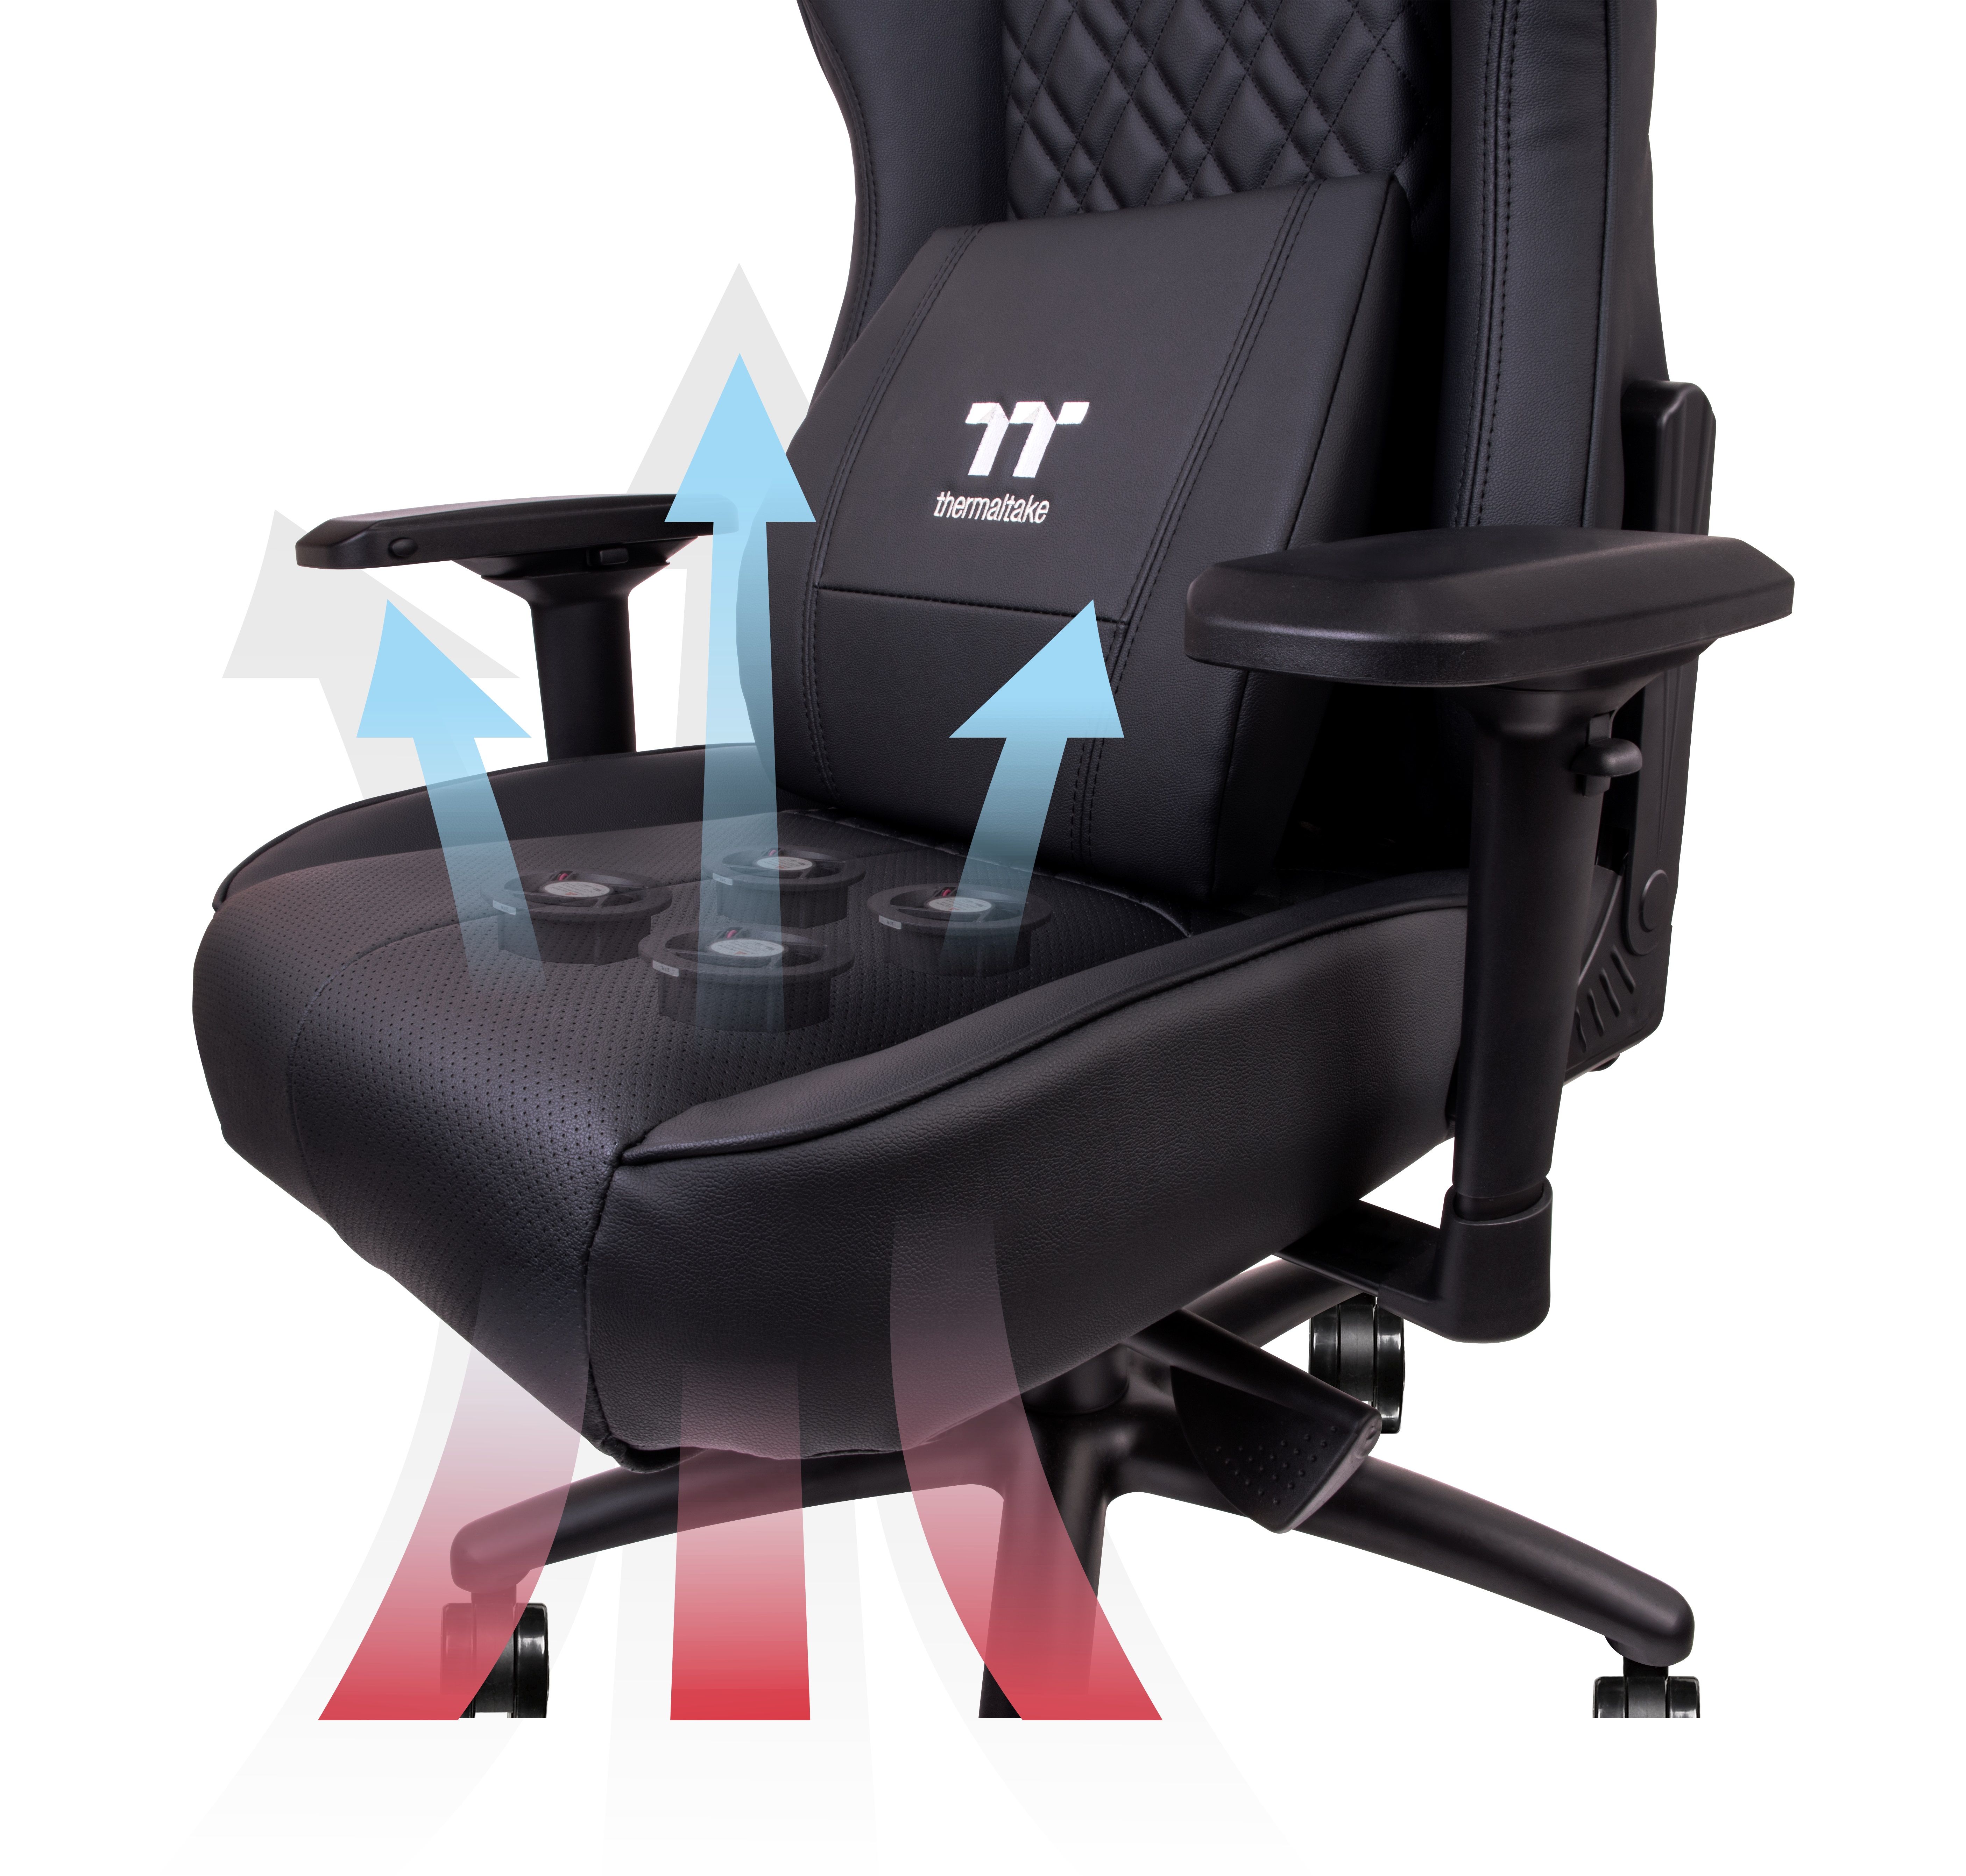 This gaming chair has feature to keep you cool while gaming